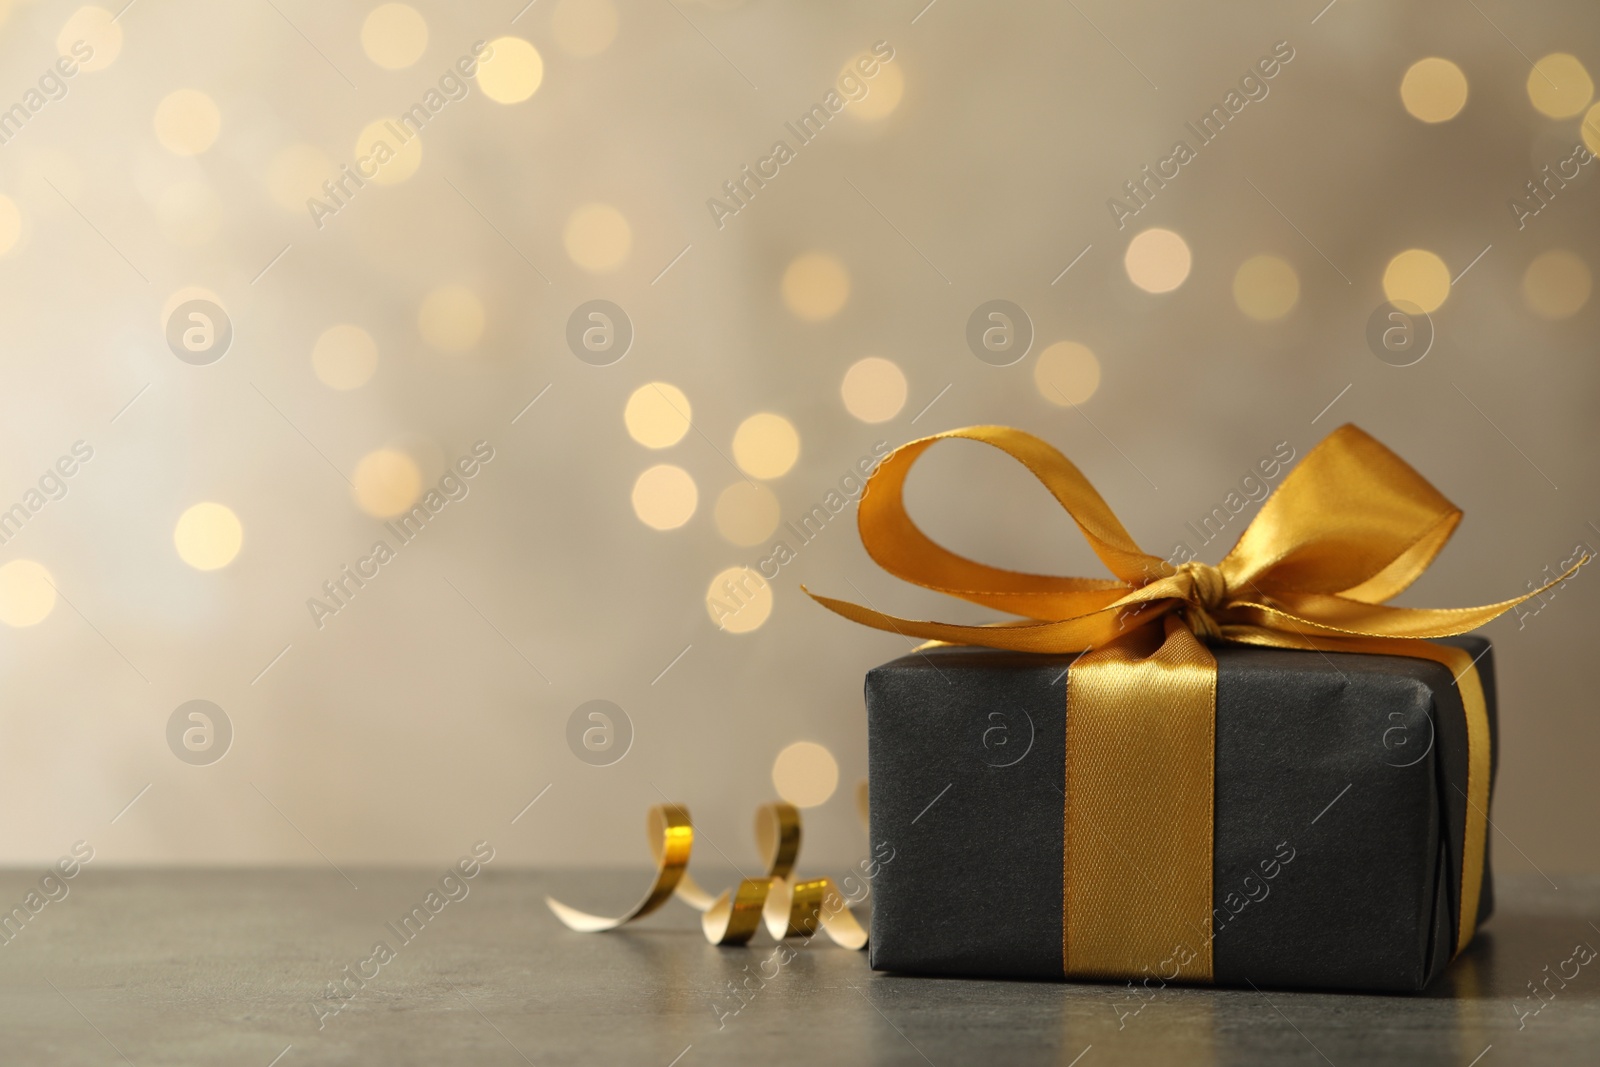 Photo of Beautifully wrapped gift box on grey table against blurred festive lights, space for text